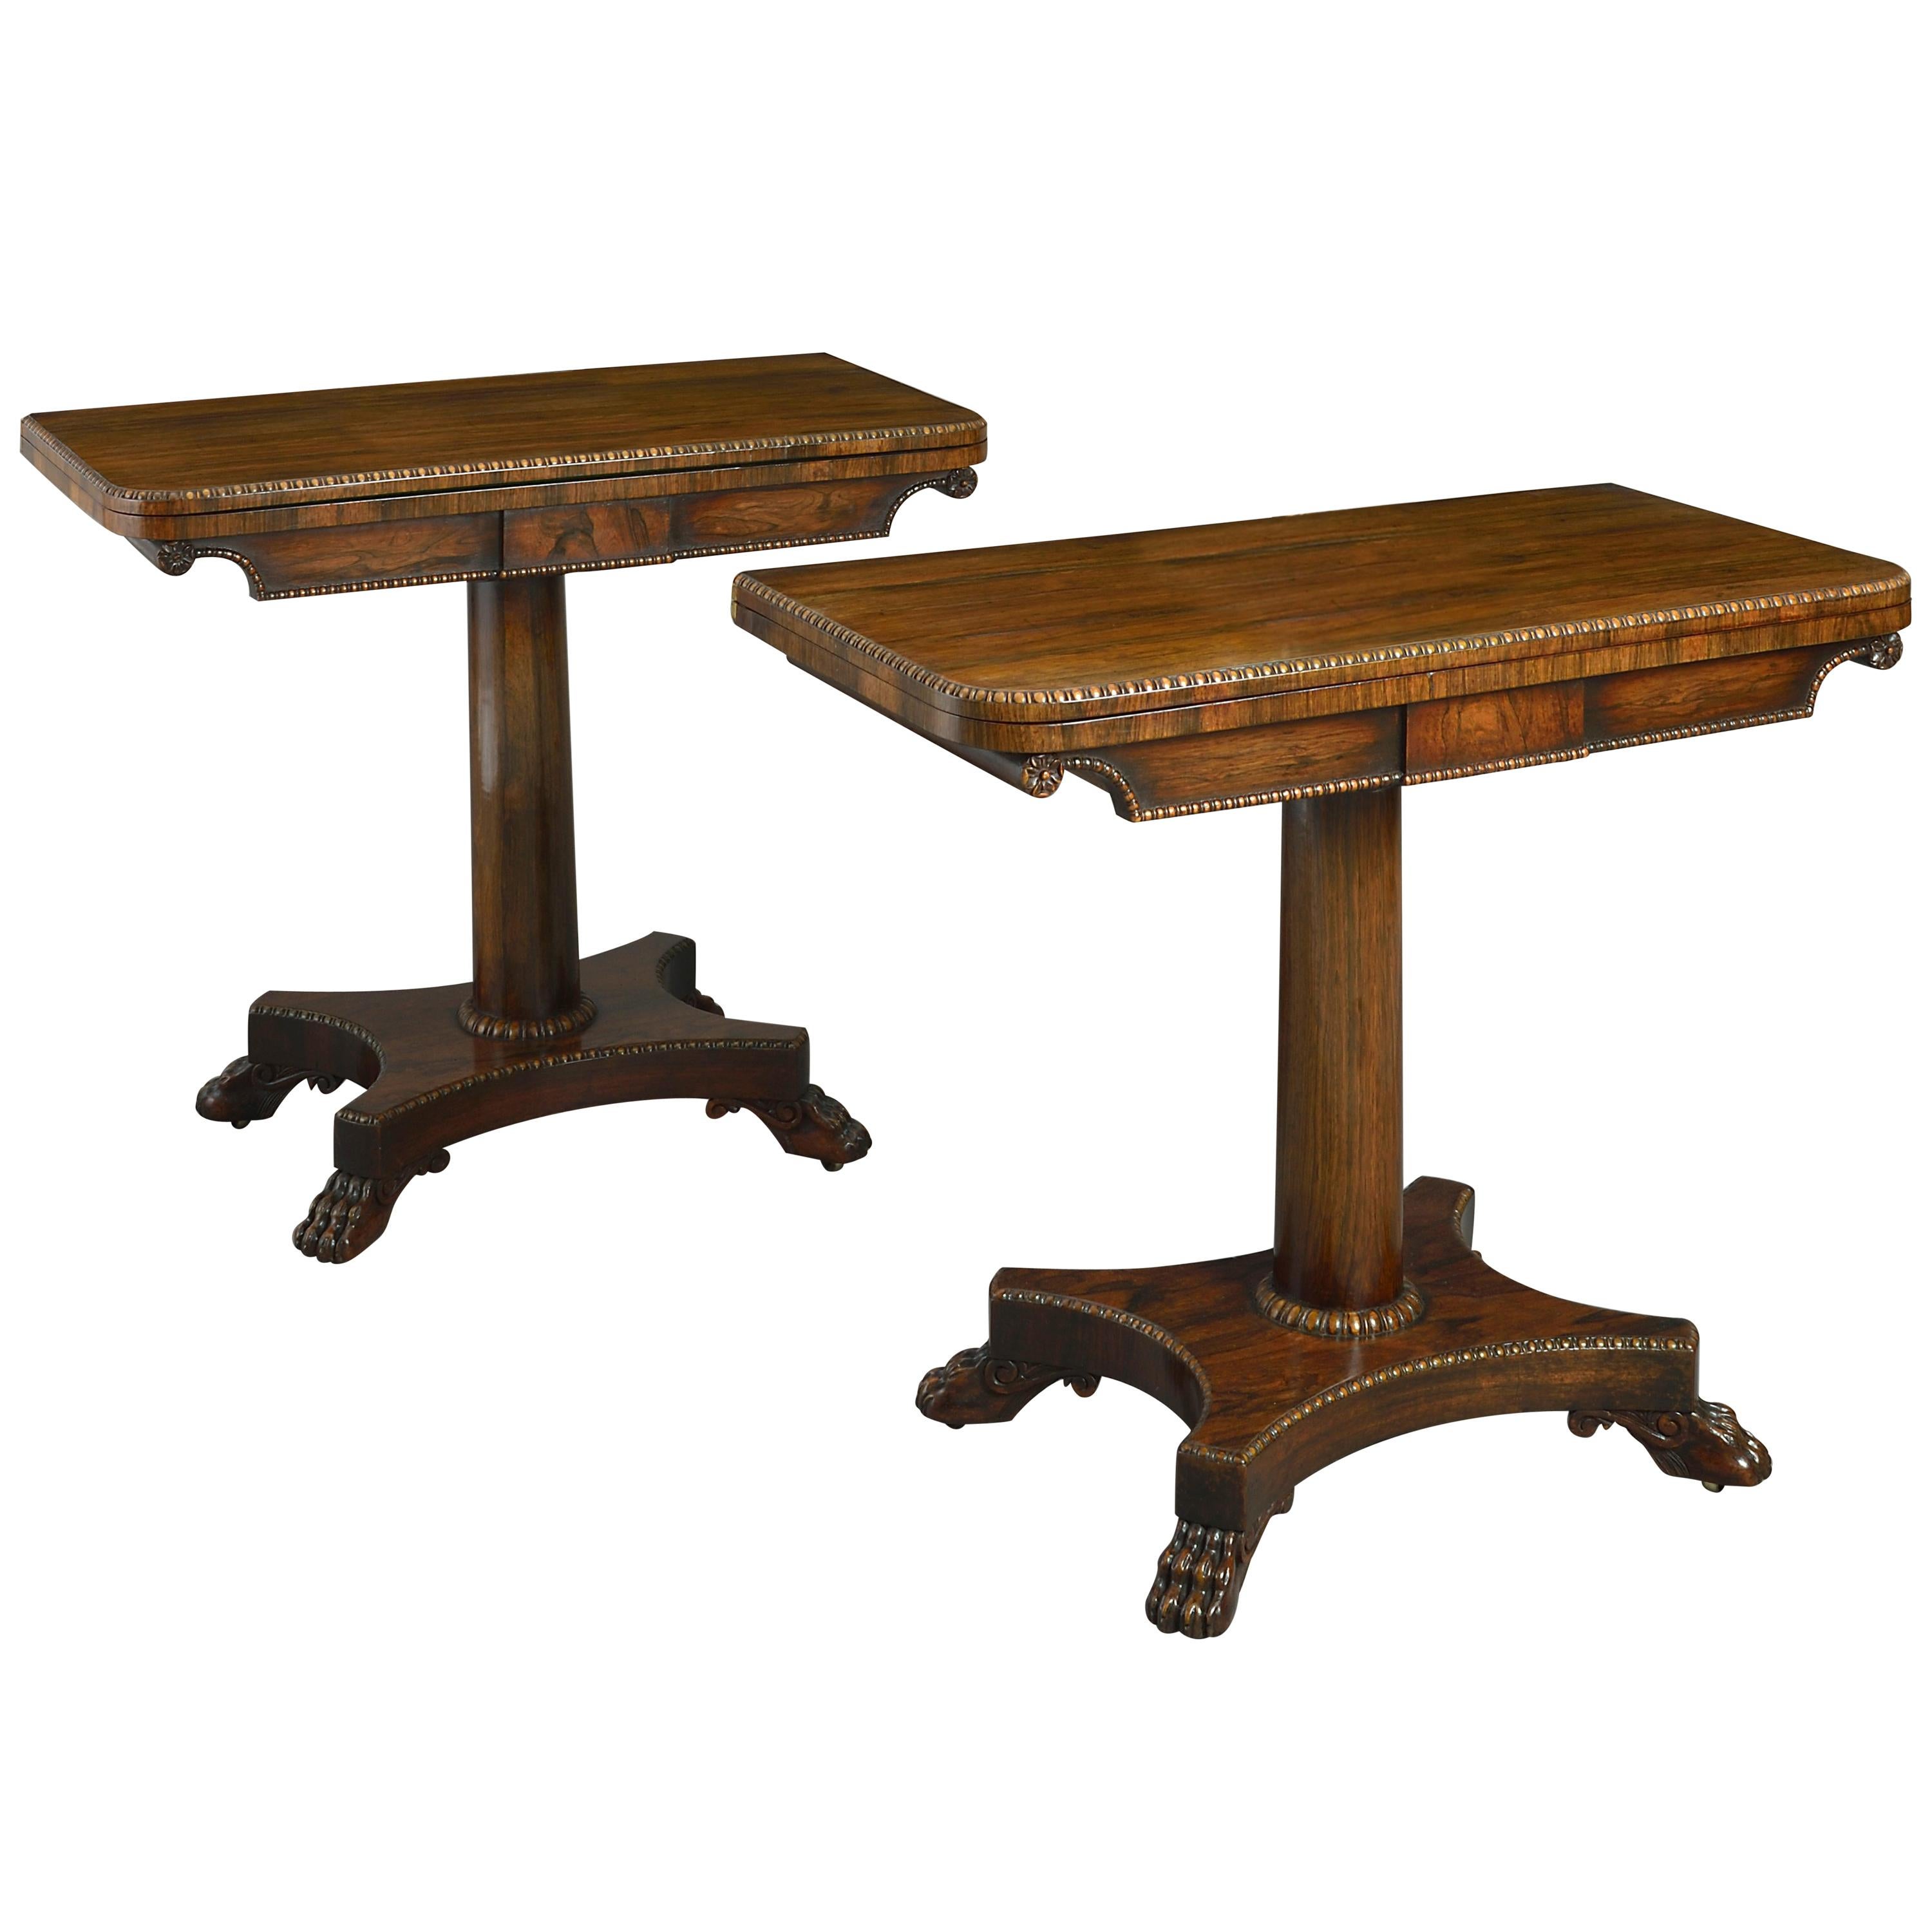 Pair of Early 19th Century Regency Period Rosewood Card Tables